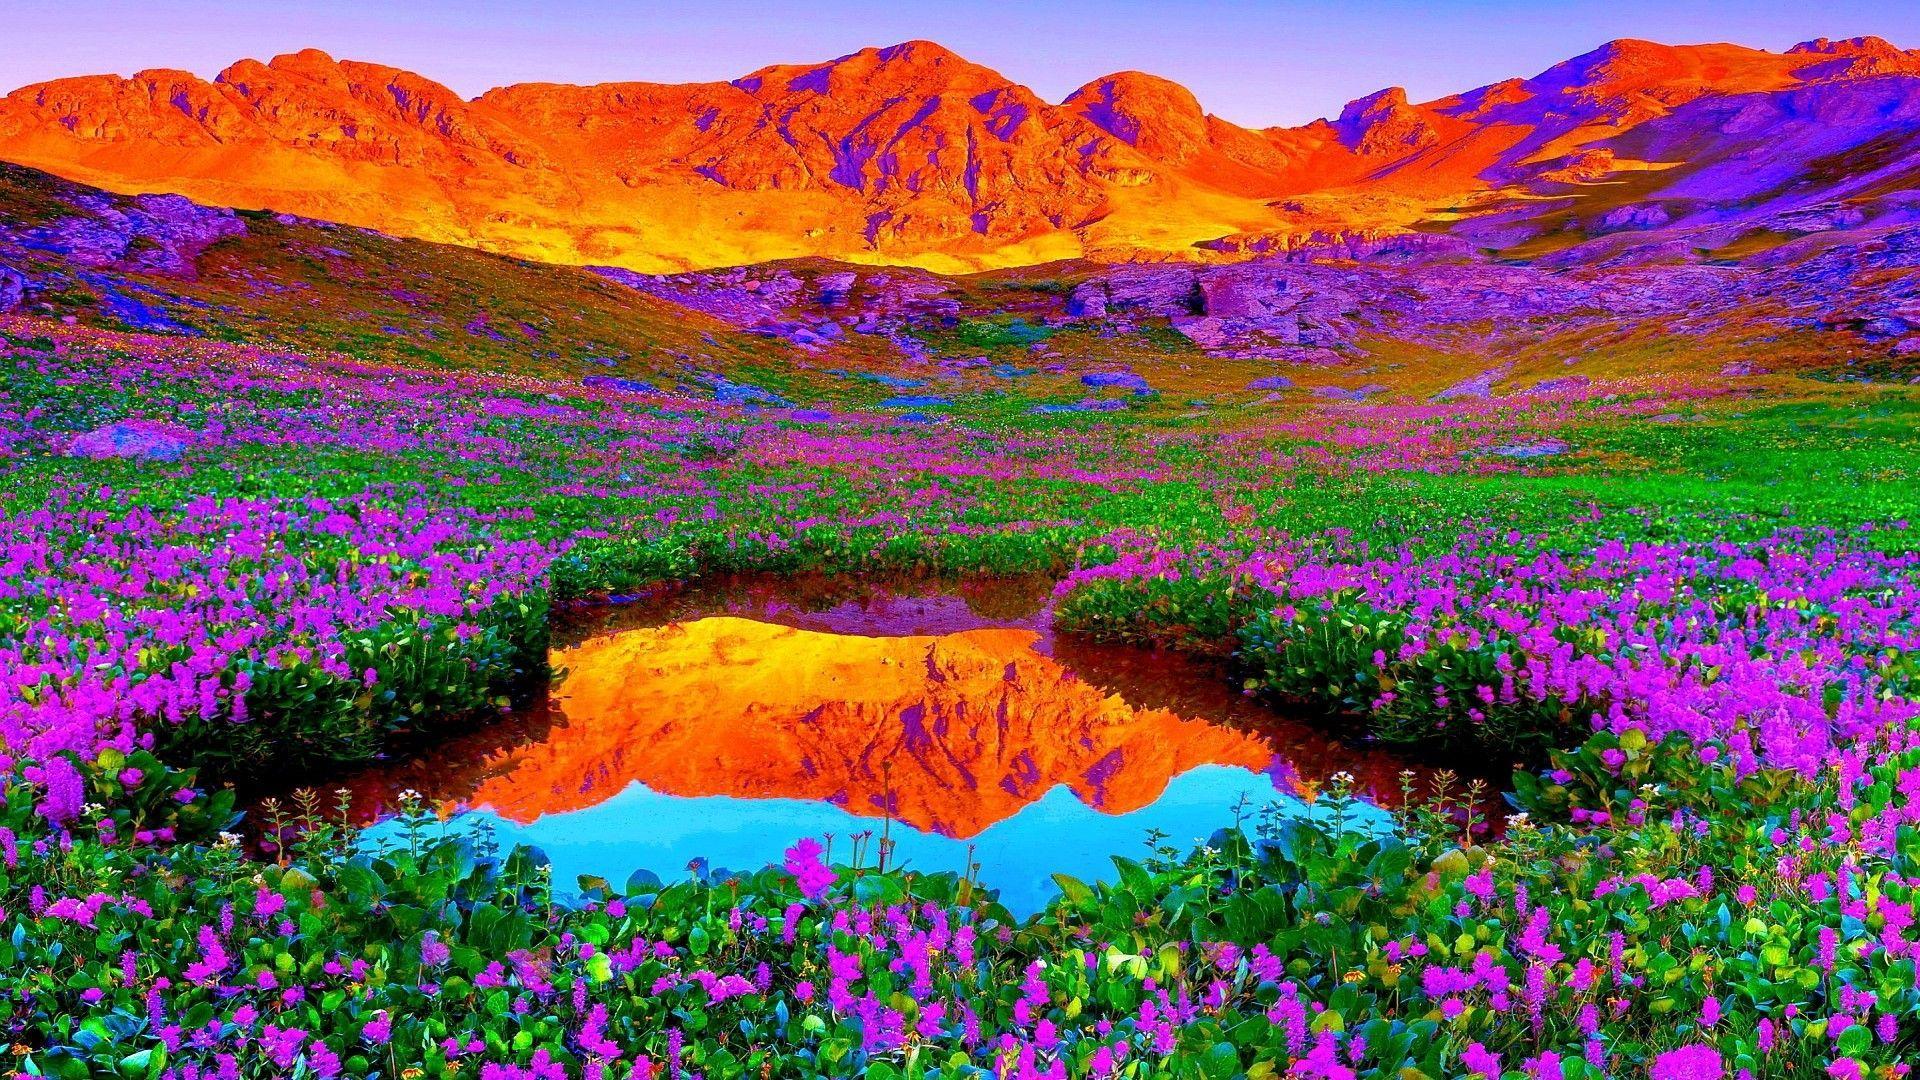 Cool Colorful Nature Wallpapers - Top Free Cool Colorful Nature